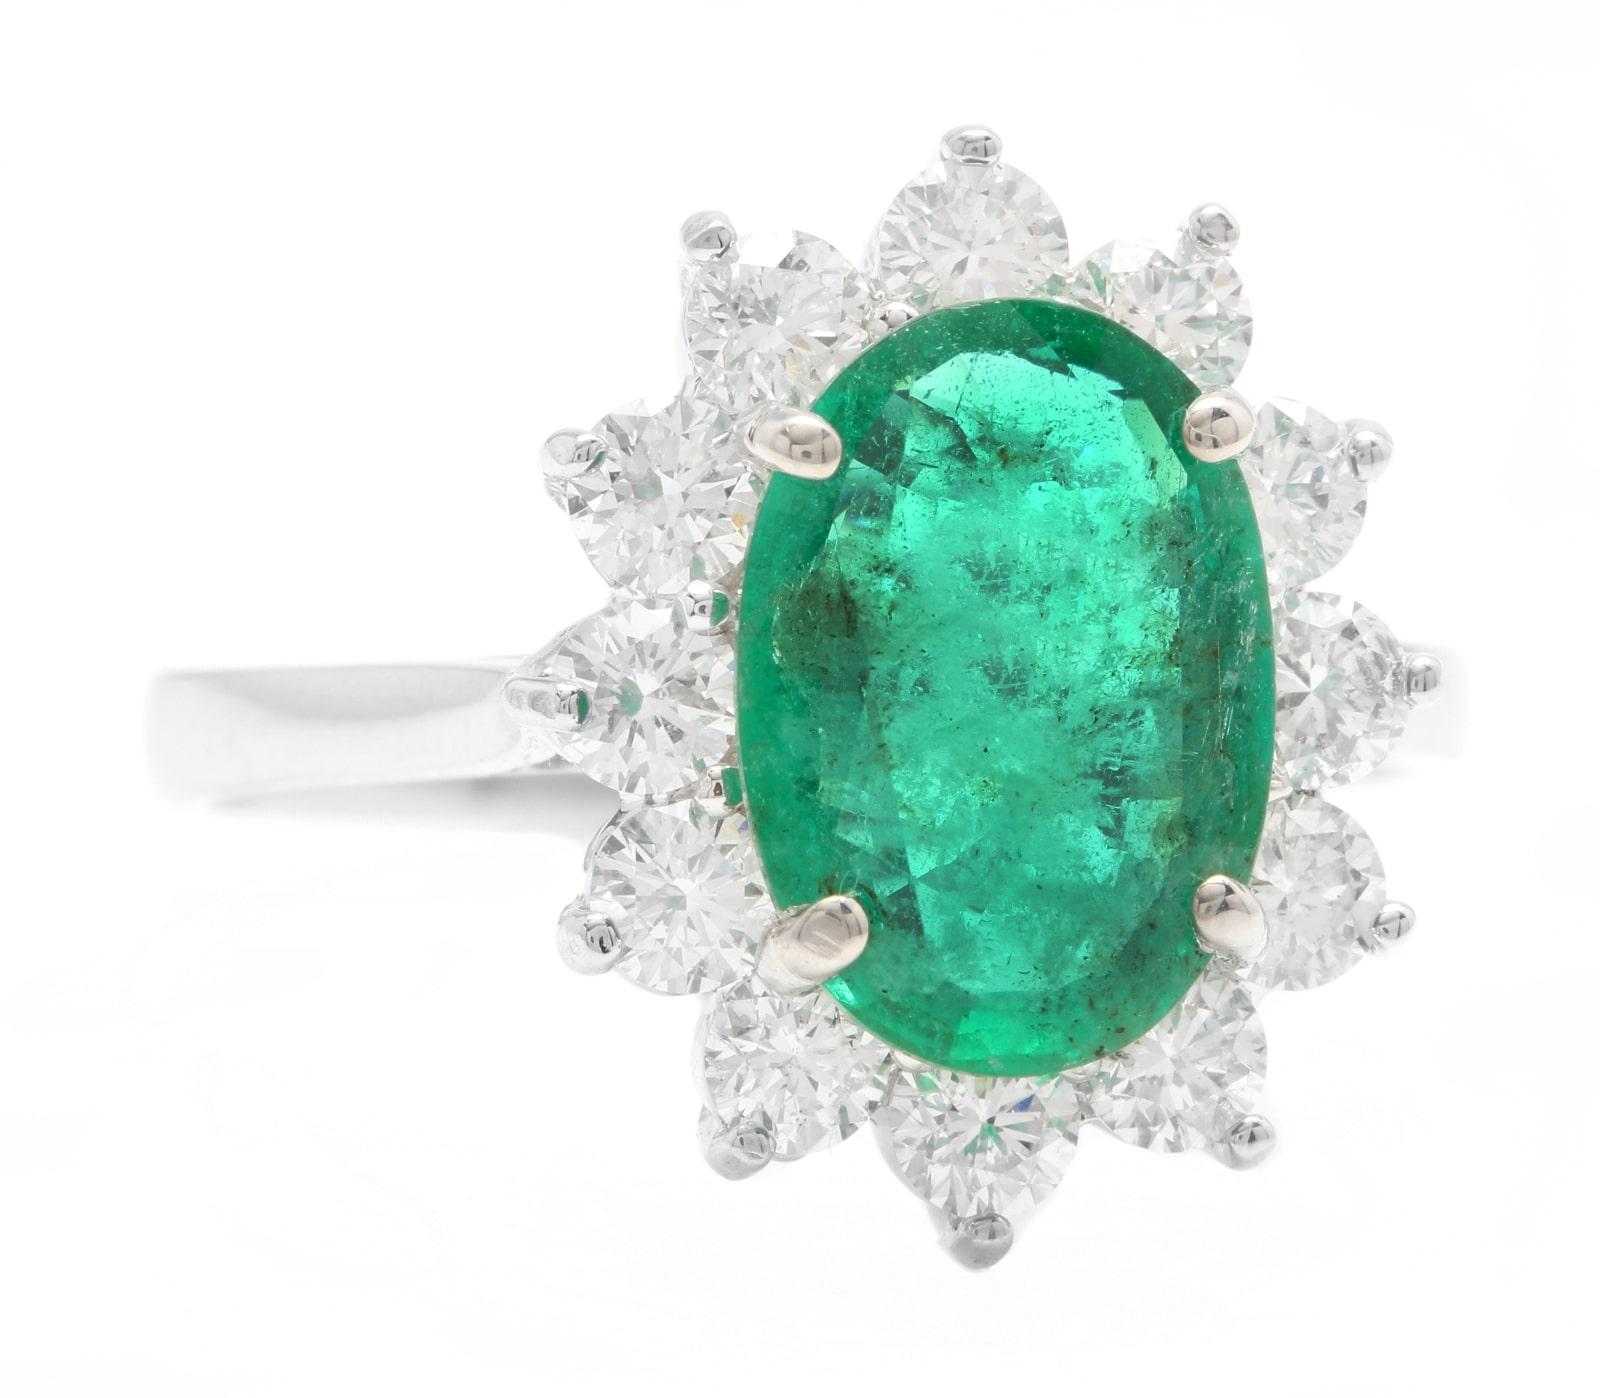 5.50 Carats Natural Emerald and Diamond 14K Solid White Gold Ring

Suggested Replacement Value: $7,000.00

Total Natural Oval Green Emerald Weight is: Approx. 4.00 Carats (transparent)

Emerald Treatment: Oiling  

Emerald Measures: Approx. 11.00 x